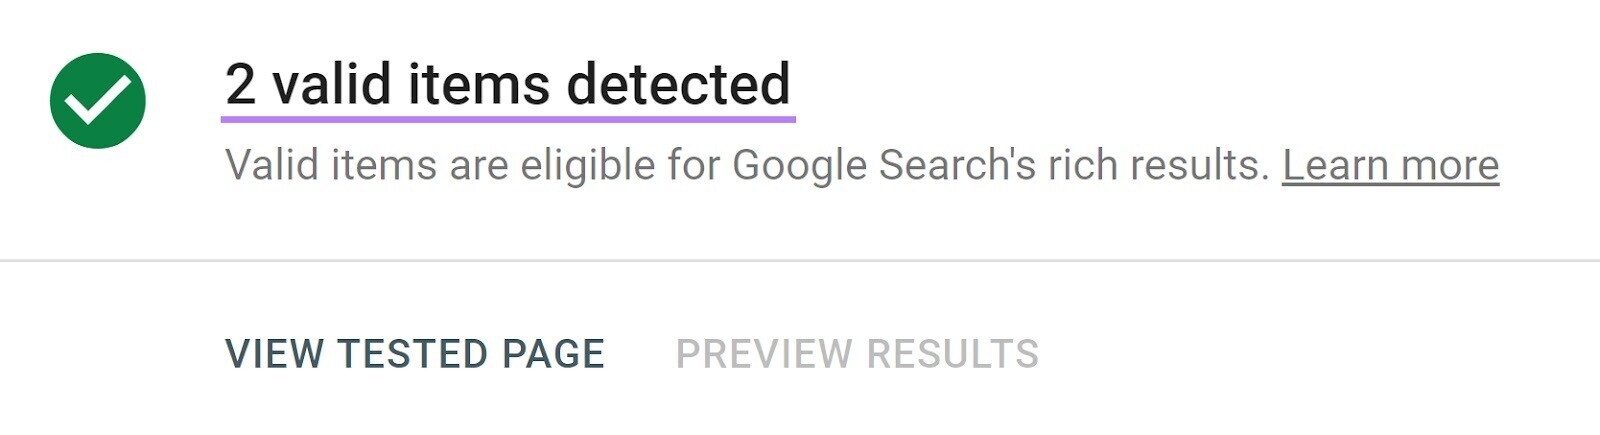 "2 valid items detected" result